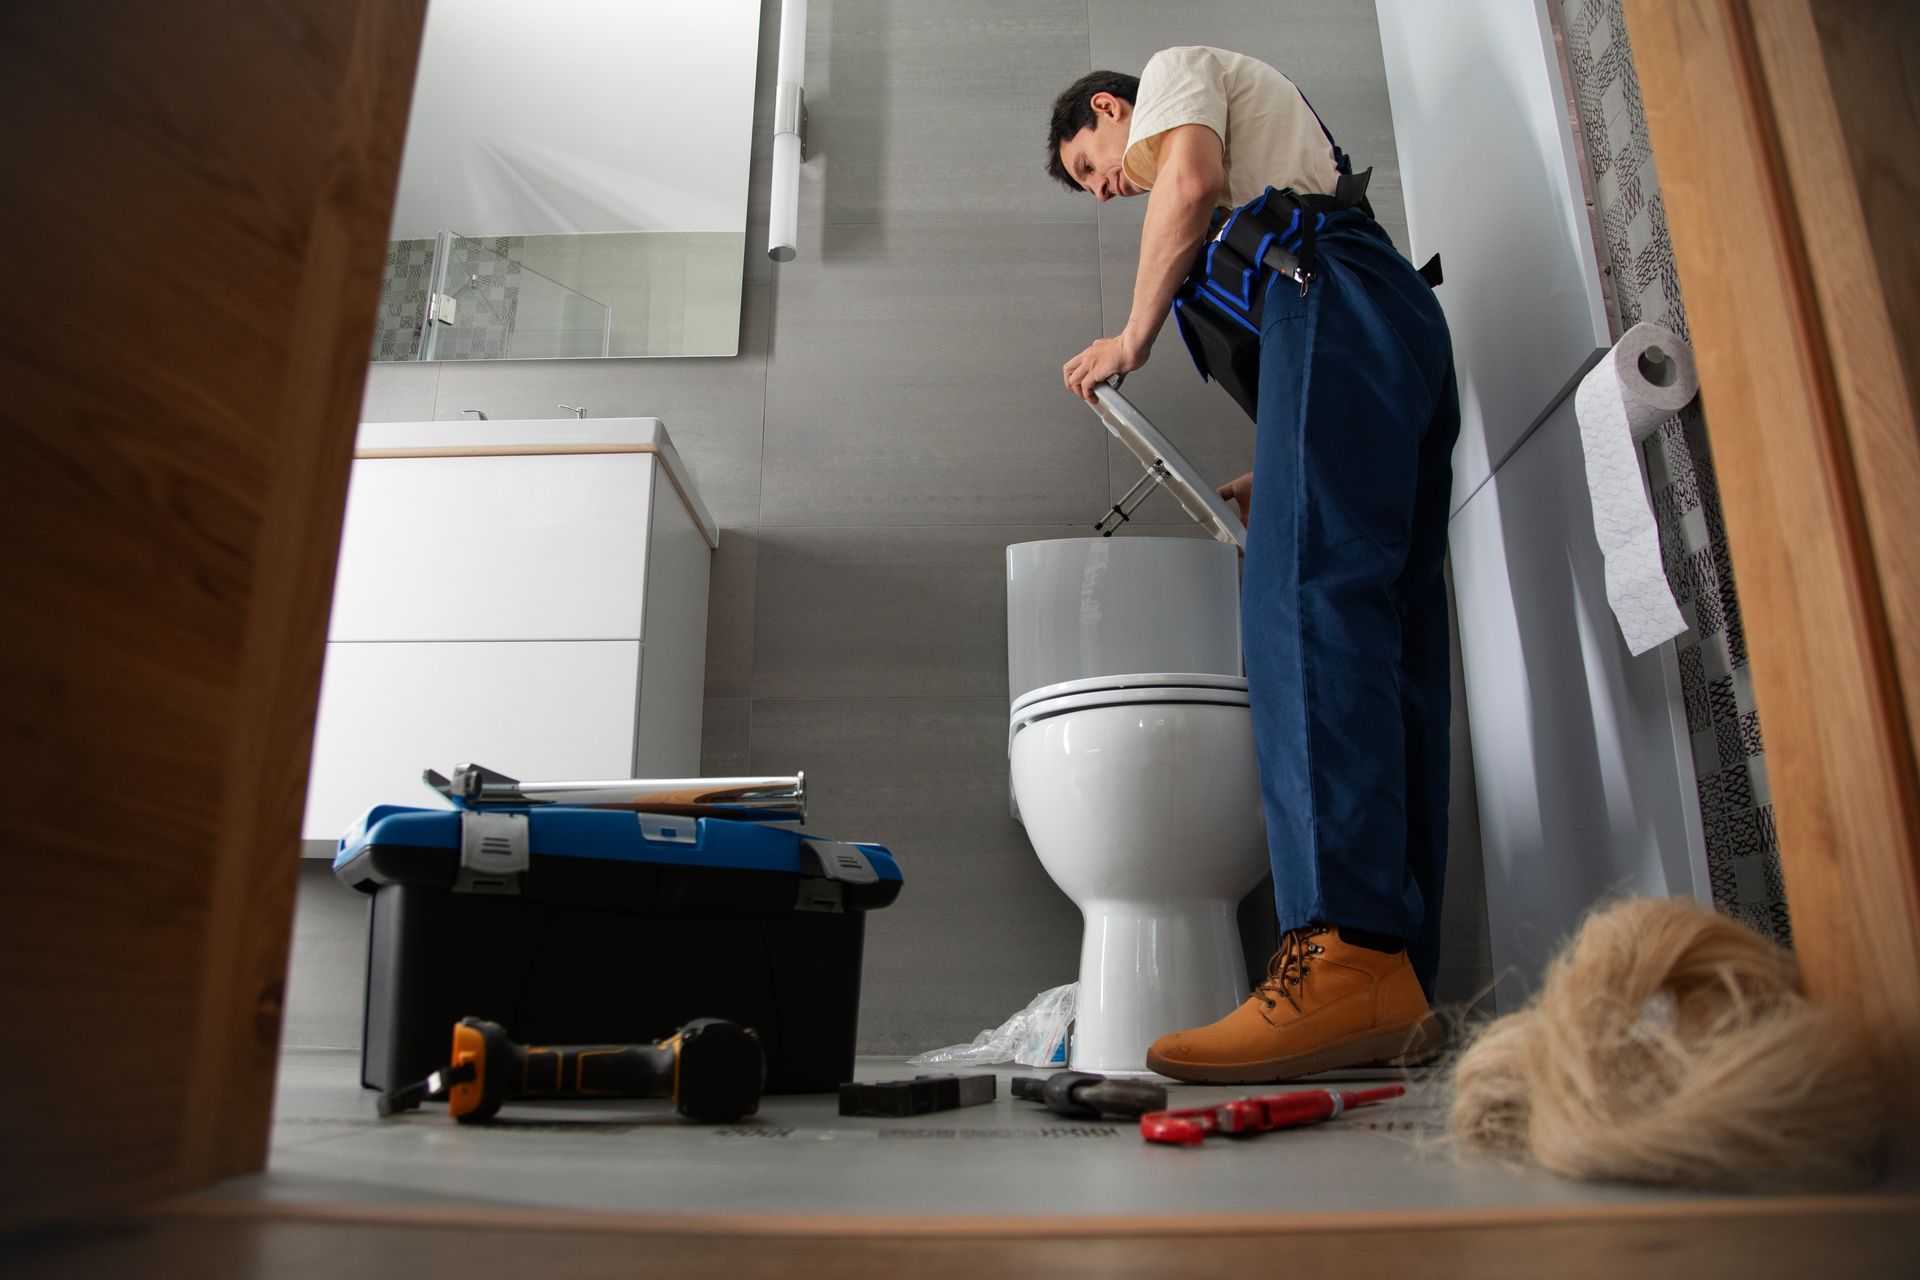 A plumber is fixing a toilet in a bathroom.